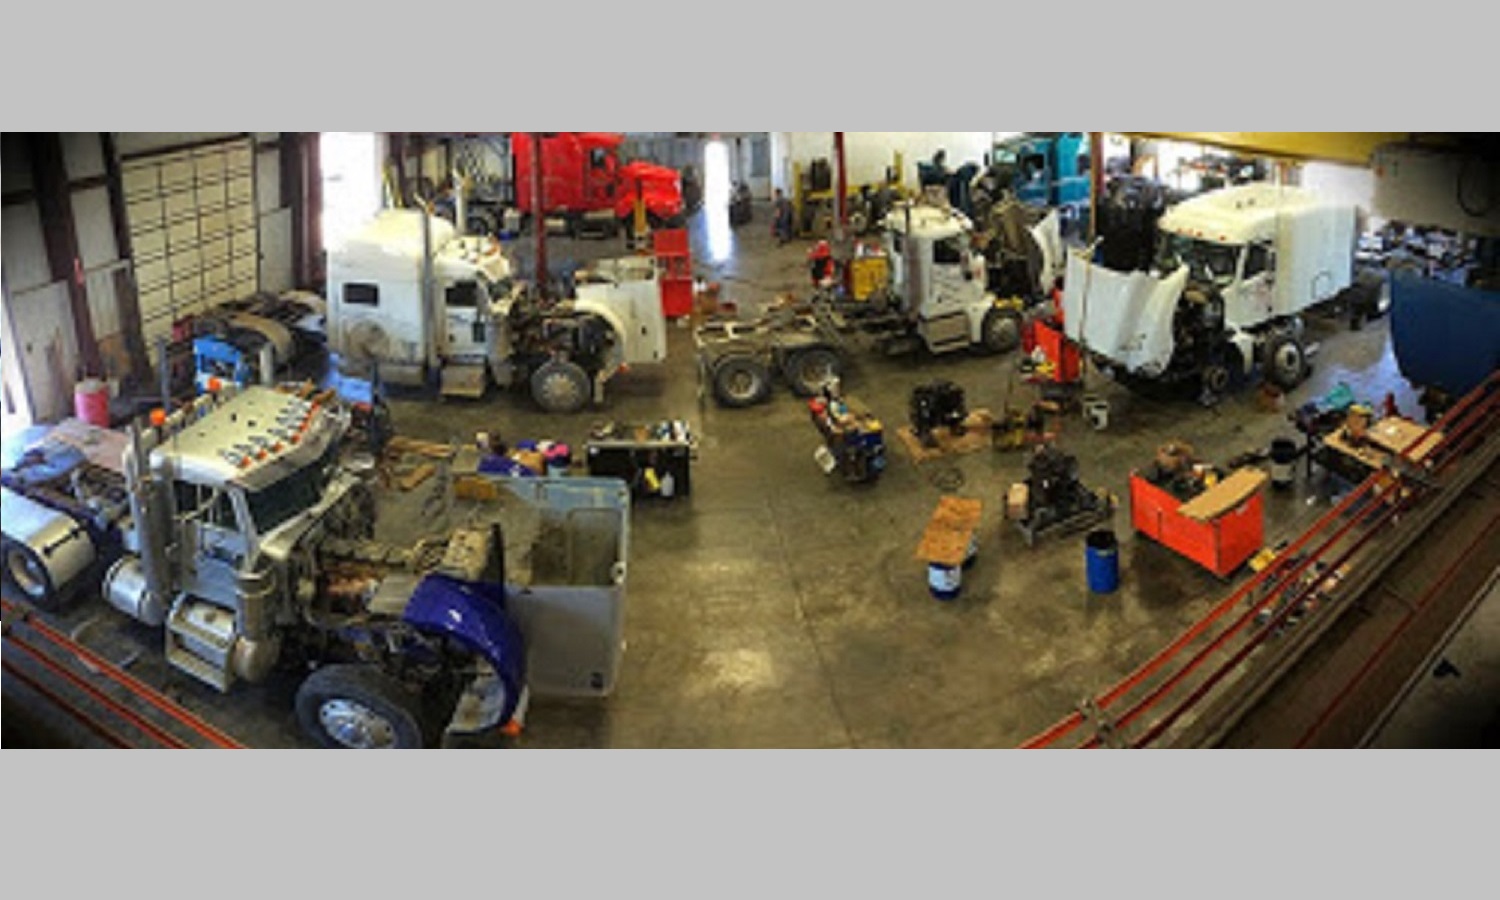 Picture of the inside of our repair shop